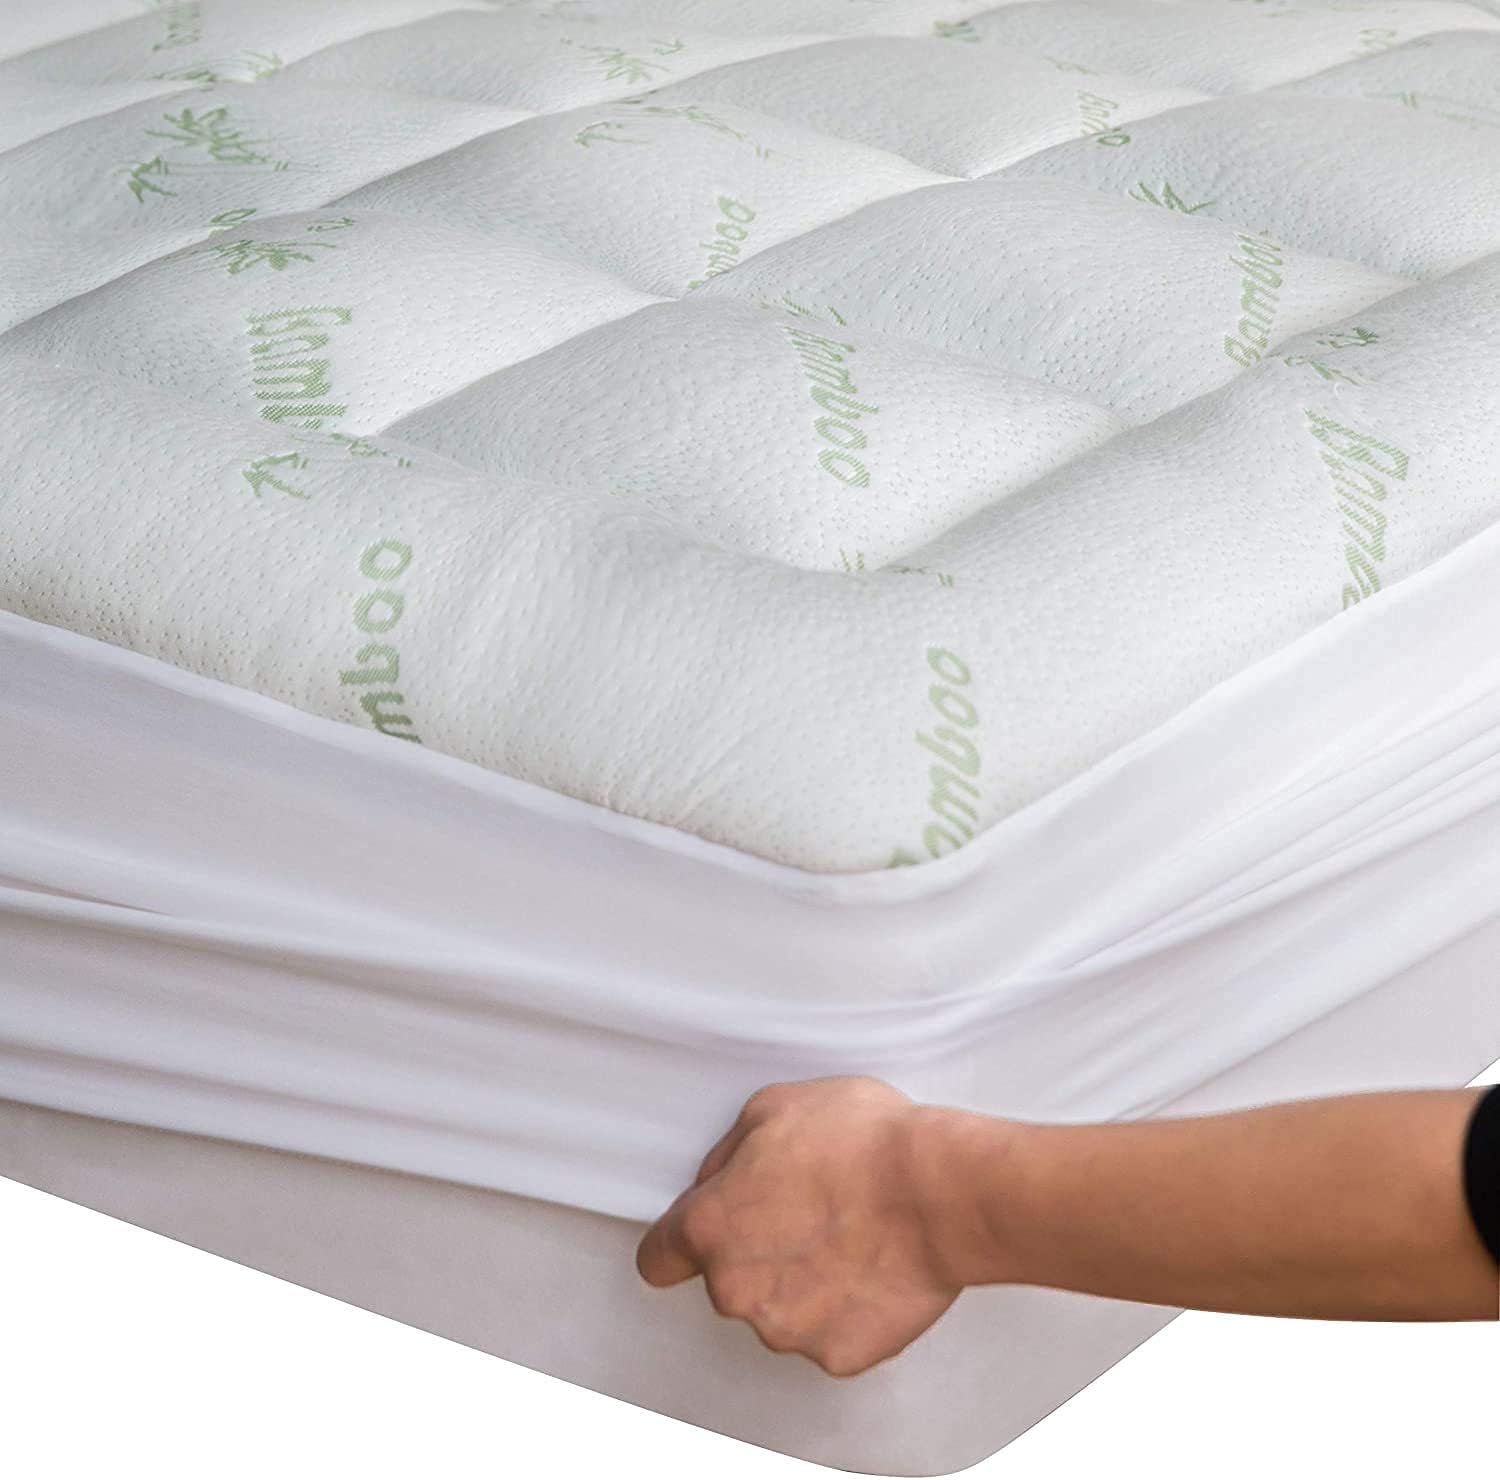 Bamboo Queen RV Mattress Topper - Thick Cooling Breathable Pillow Top Mattress Pad for Back Pain Relief - Deep Pocket Topper Fits 8-20 Inches Mattress (Viscose Made from Bamboo, 60x75 Inches)